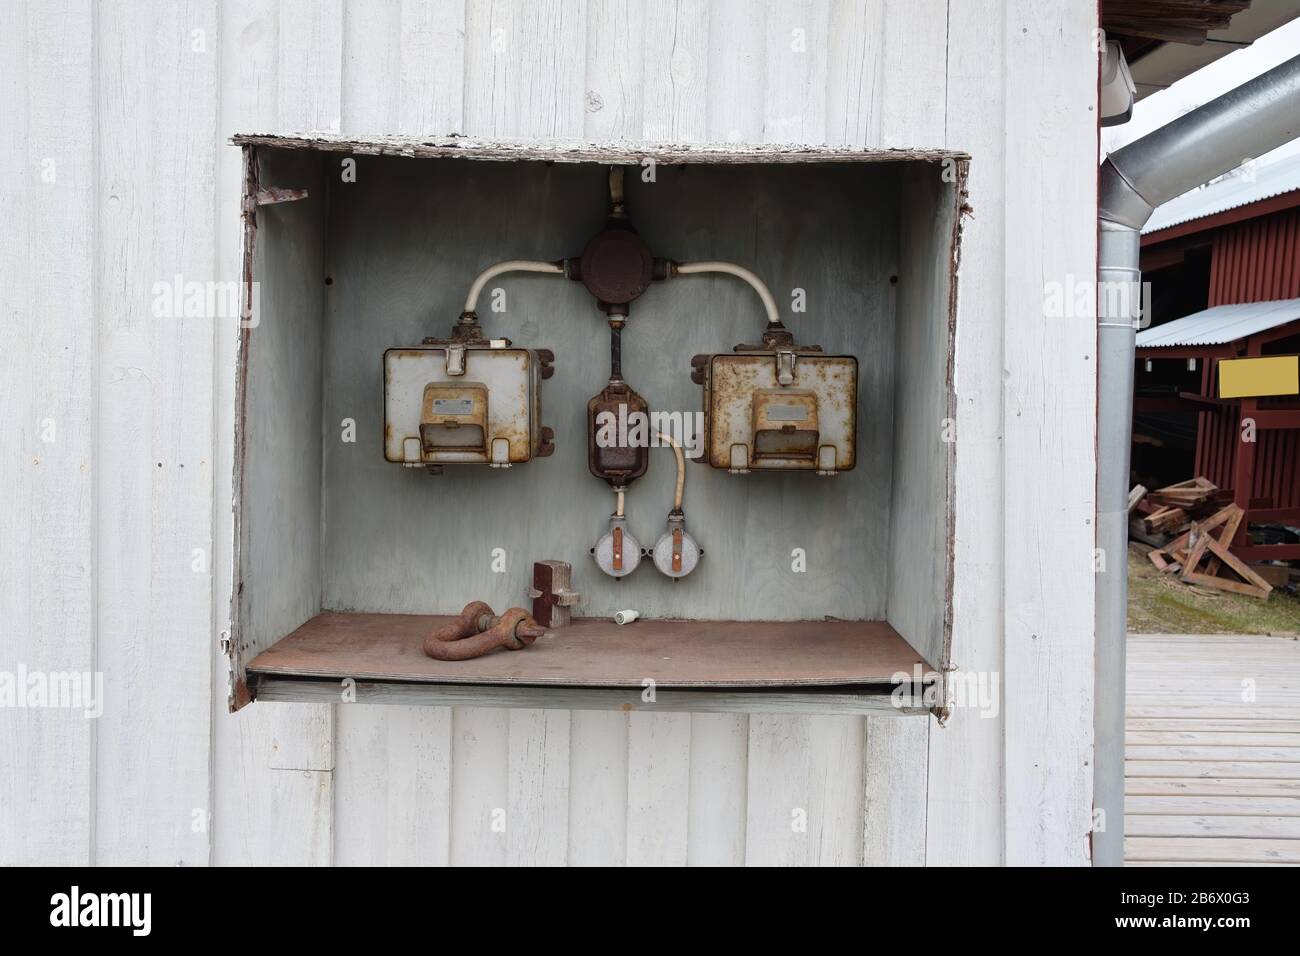 Old and rusty electric control box on the wall. Stock Photo